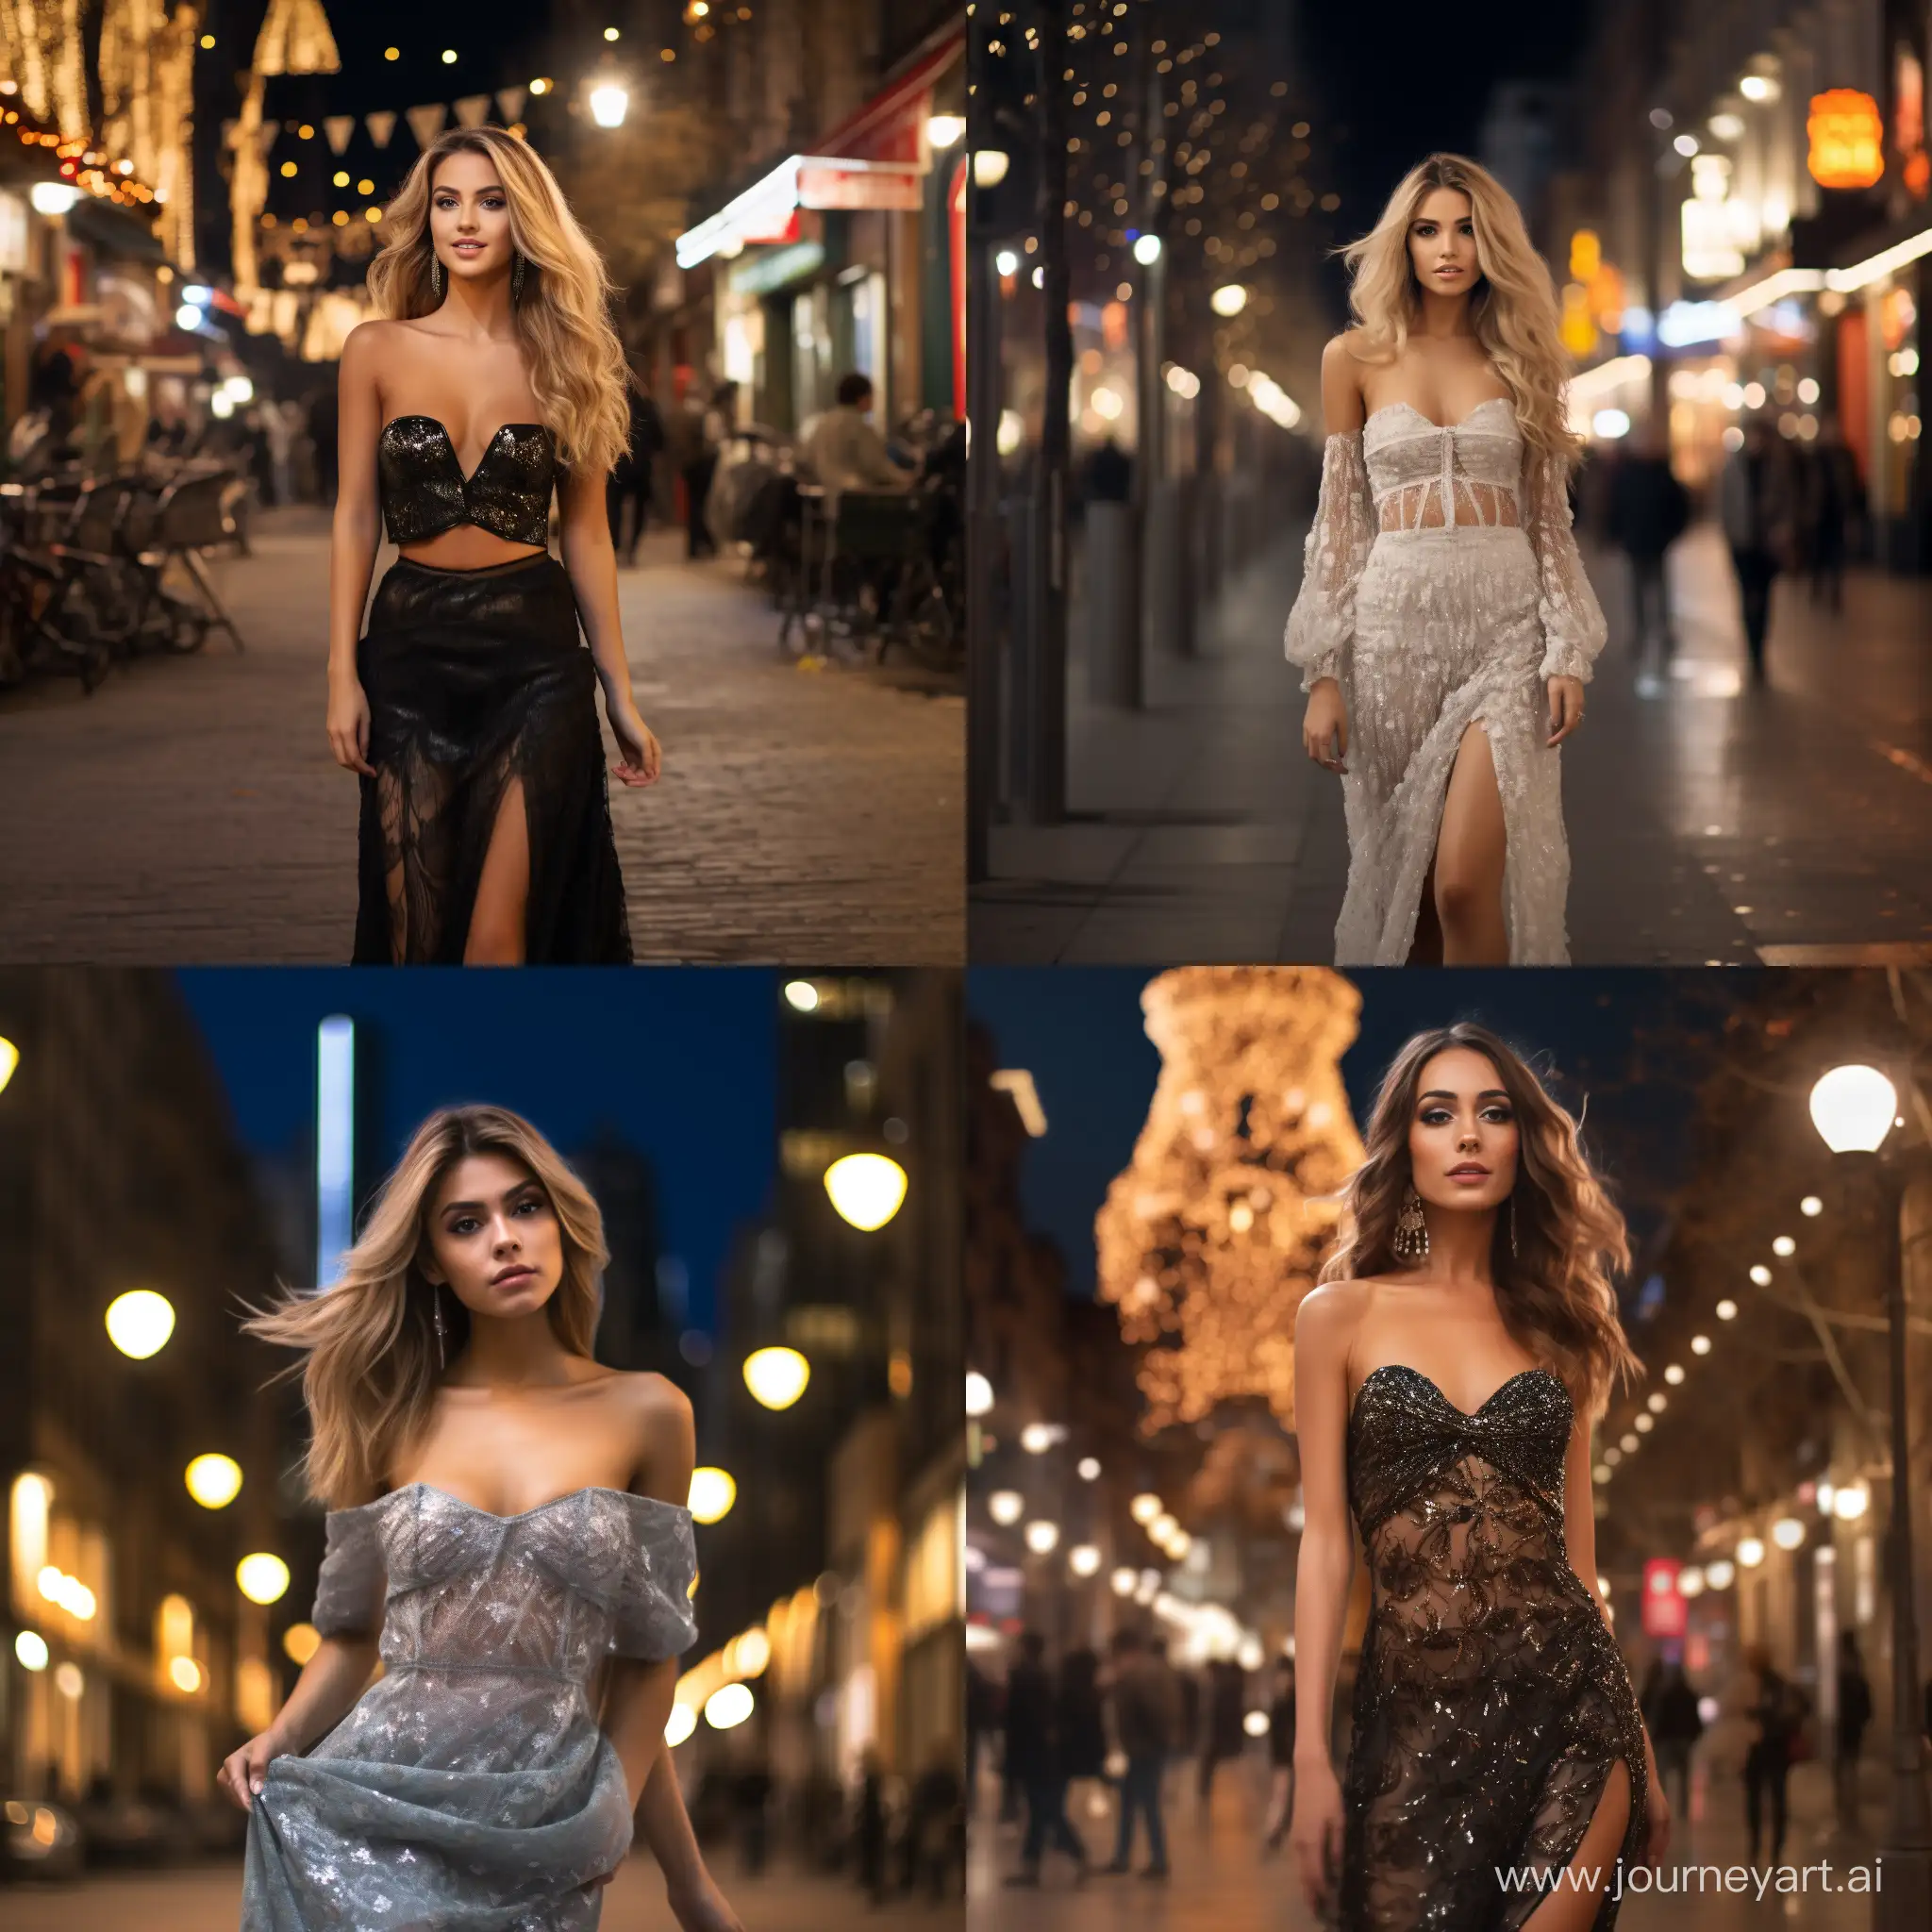 Stylish-Hollywood-Model-in-Barcelona-Winter-Night-Stroll-on-New-Years-Eve